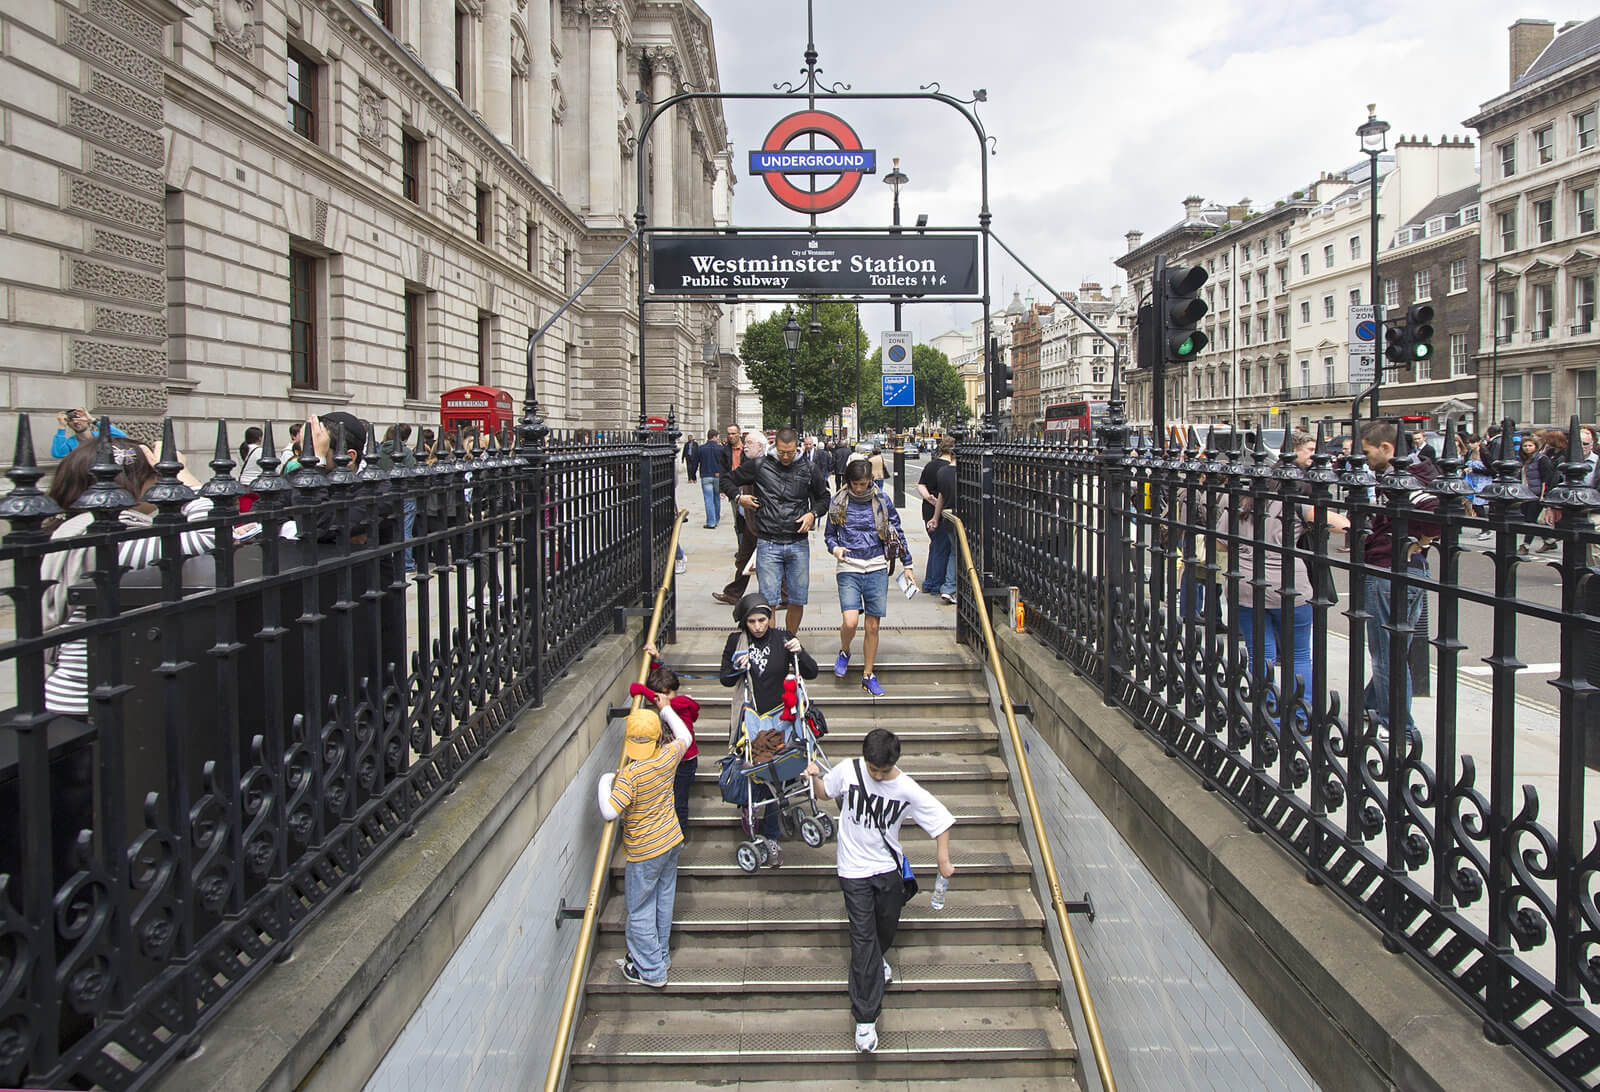 View of Underground Station - Using a stroller in London / London with a baby